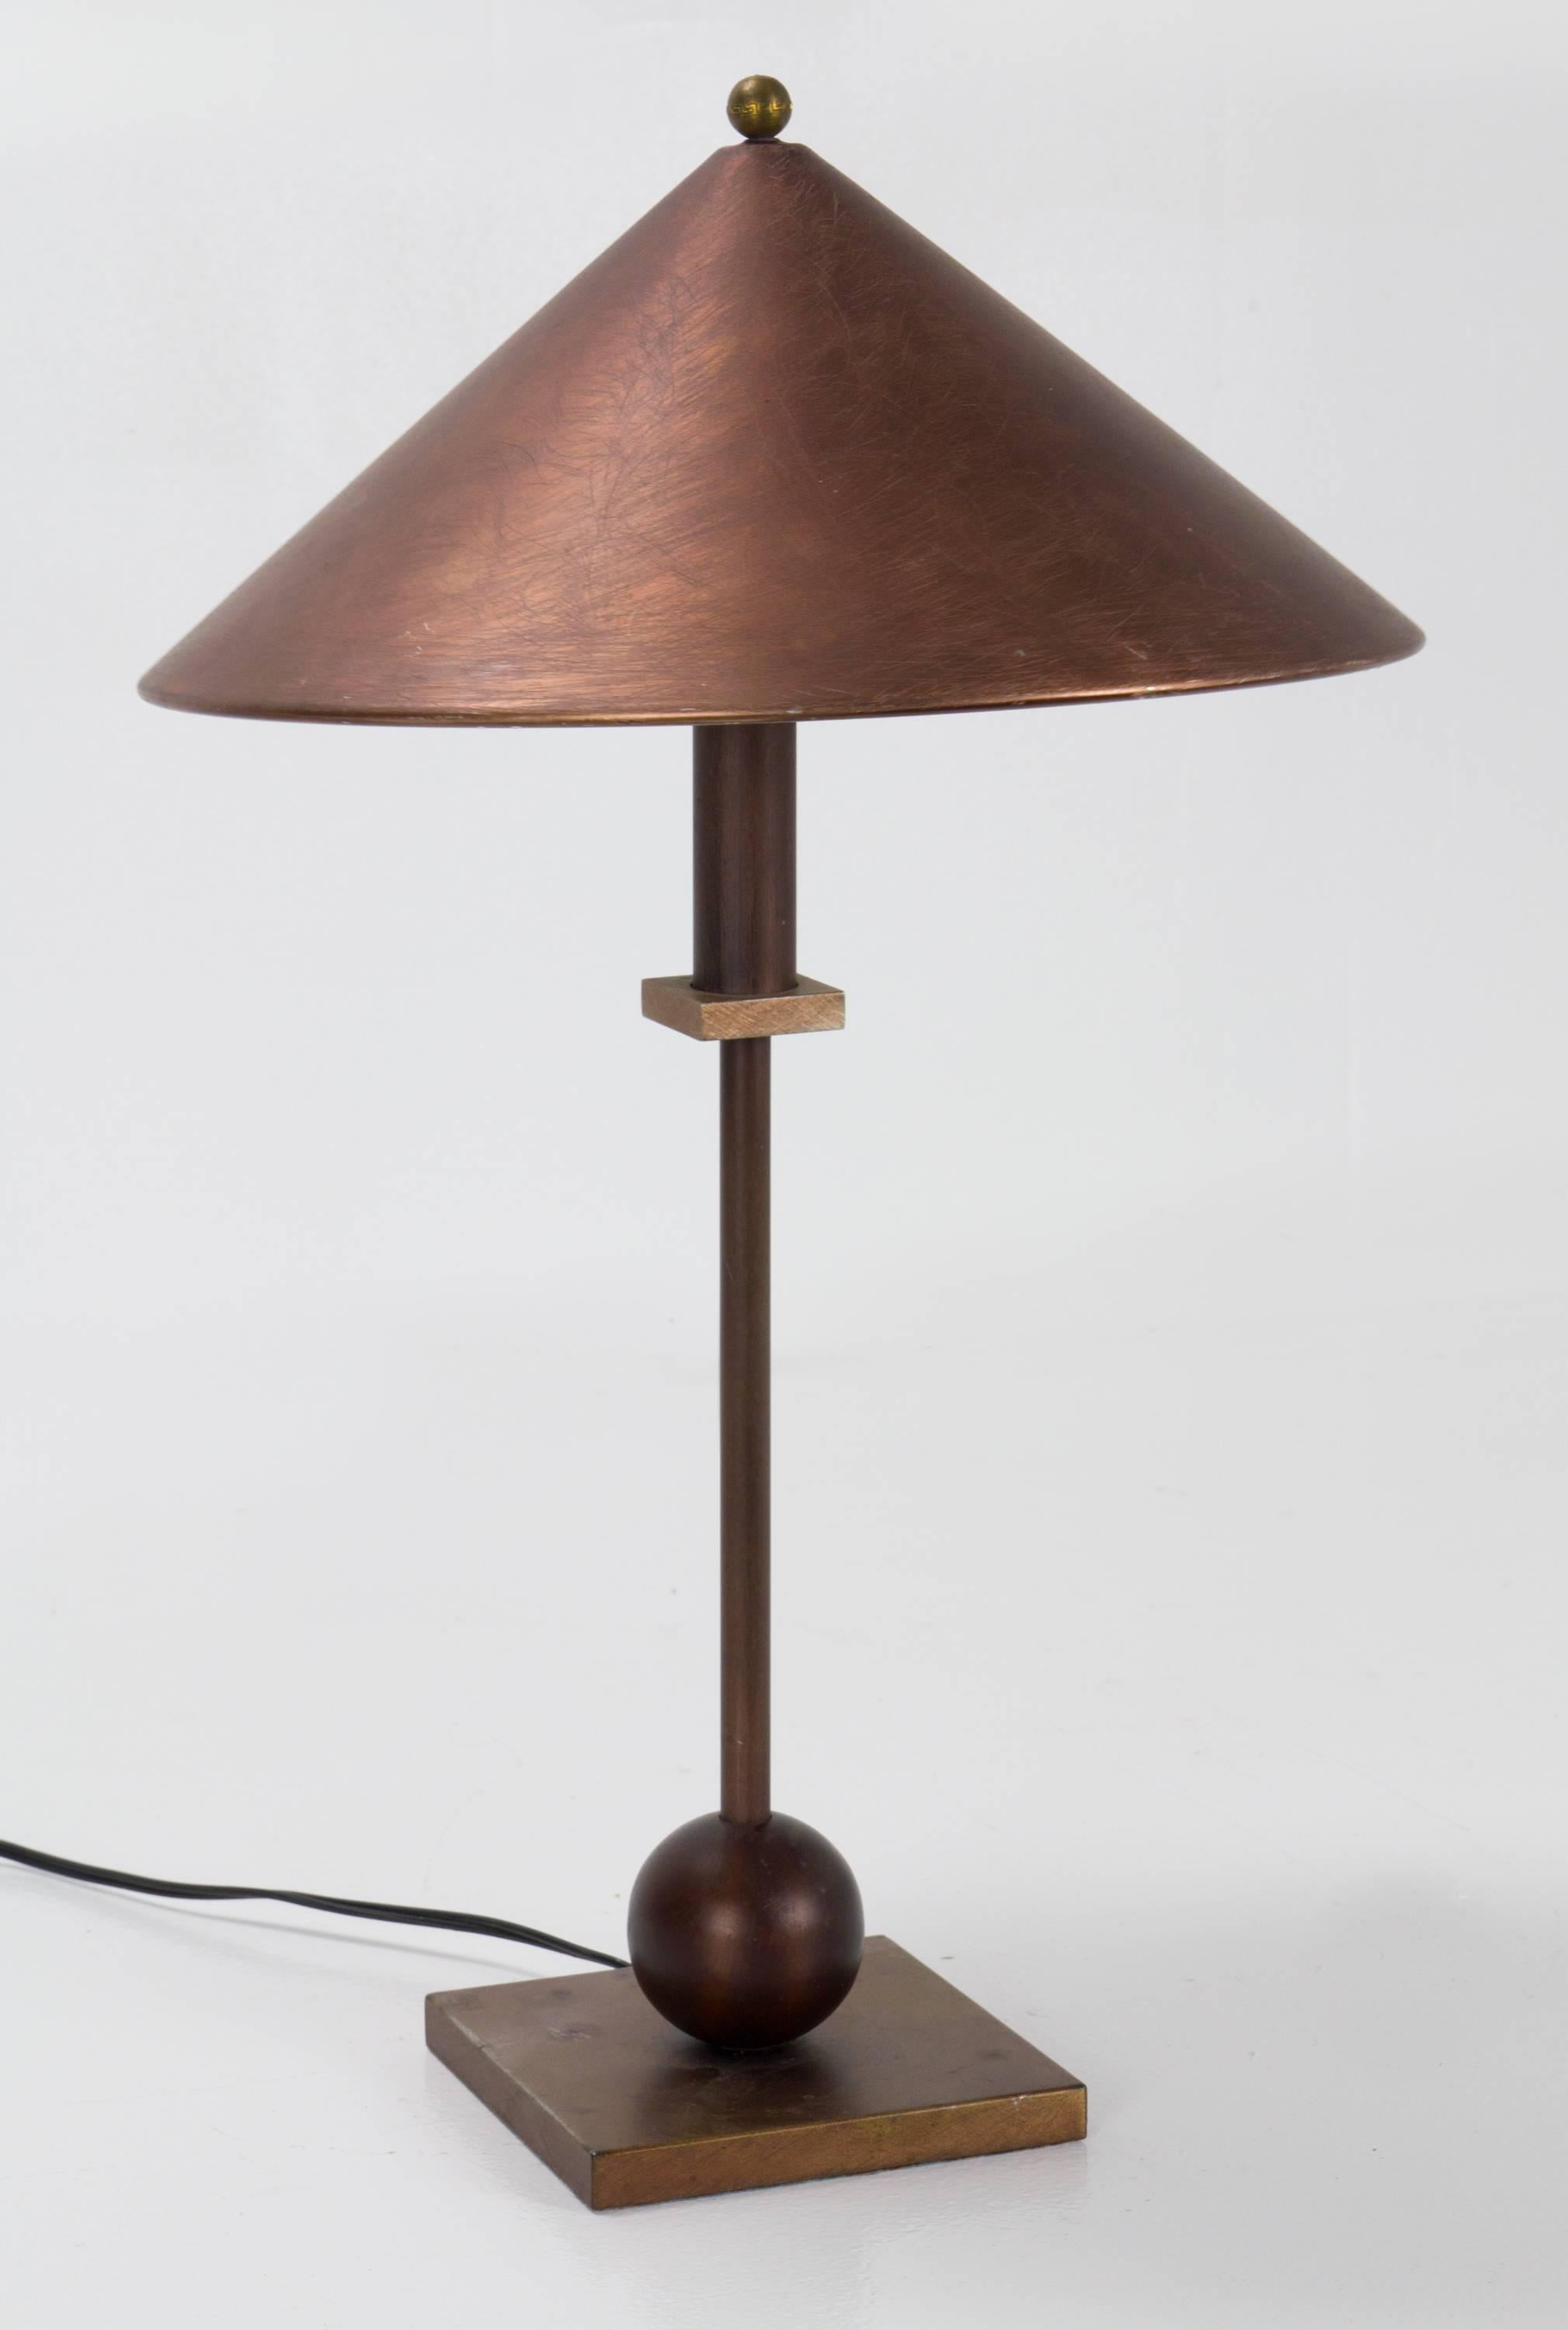 Pair of Postmodern table lamps by Robert Sonneman for Kovacs in a lesser seen brushed copper finish with heavy brass bases.